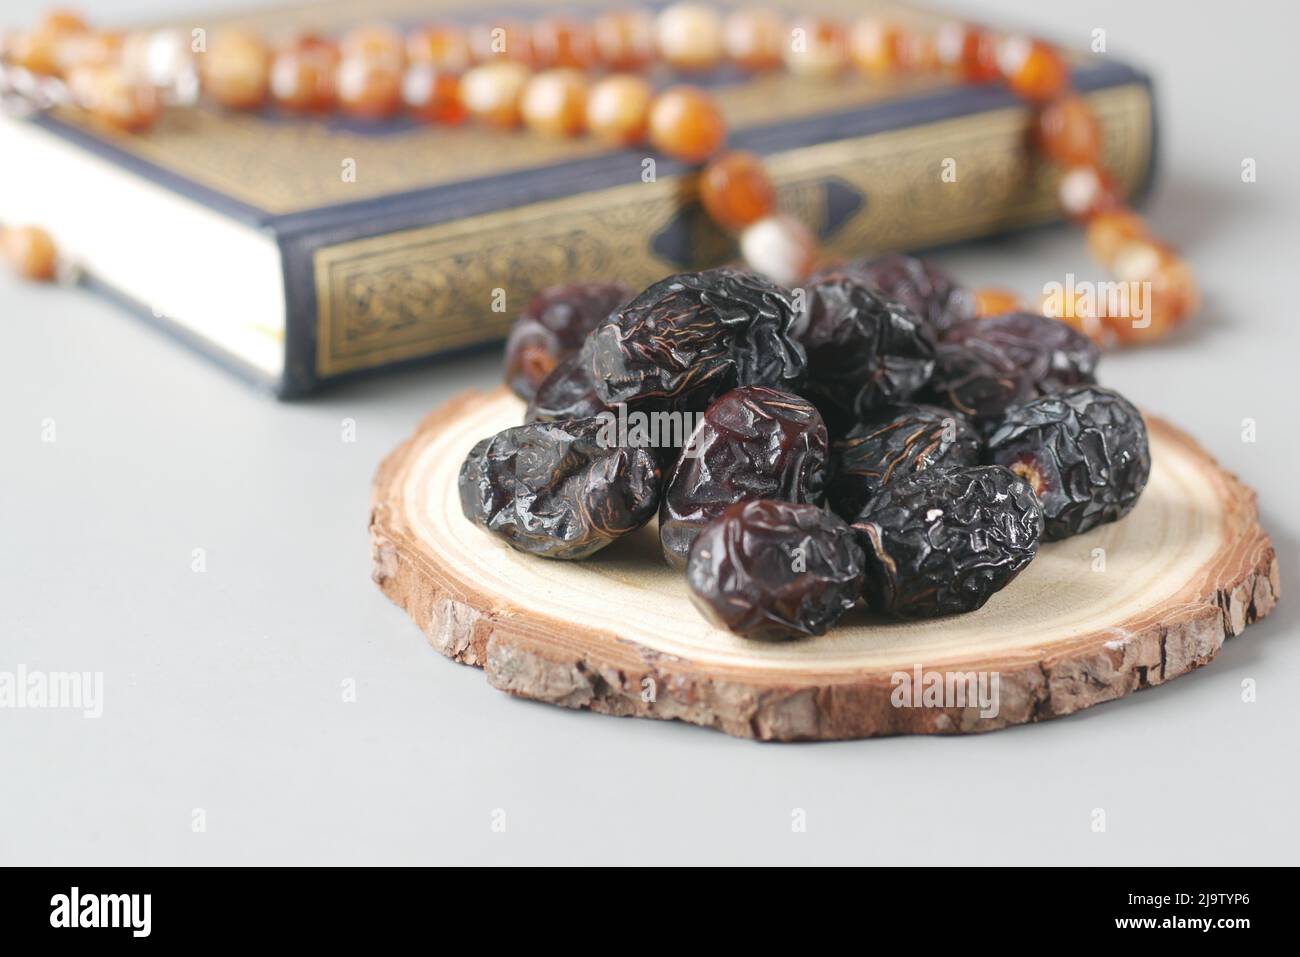 Holy book Quran and rosary on table, close up. Stock Photo